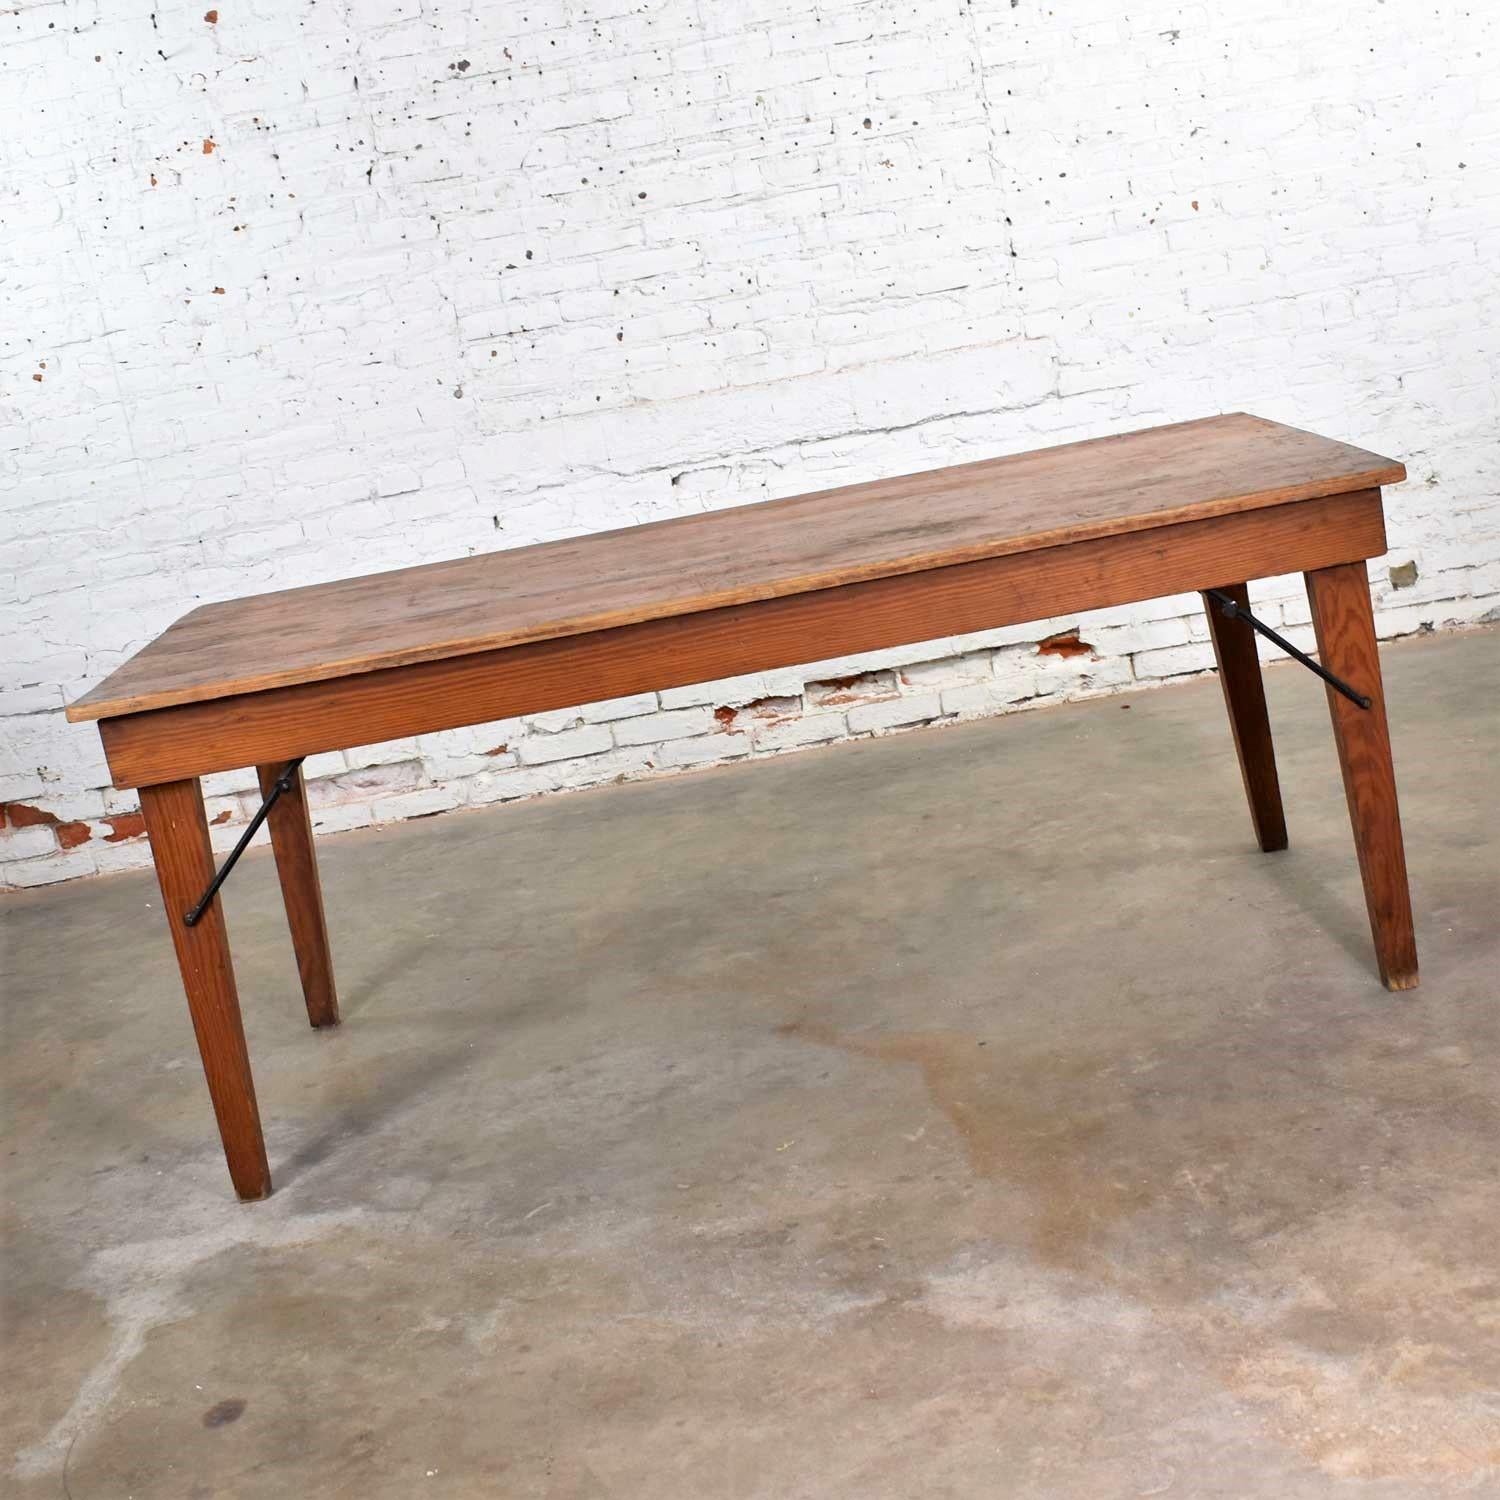 Vintage Pine Industrial Rustic Worktable or Farmhouse Table with Folding Legs 4